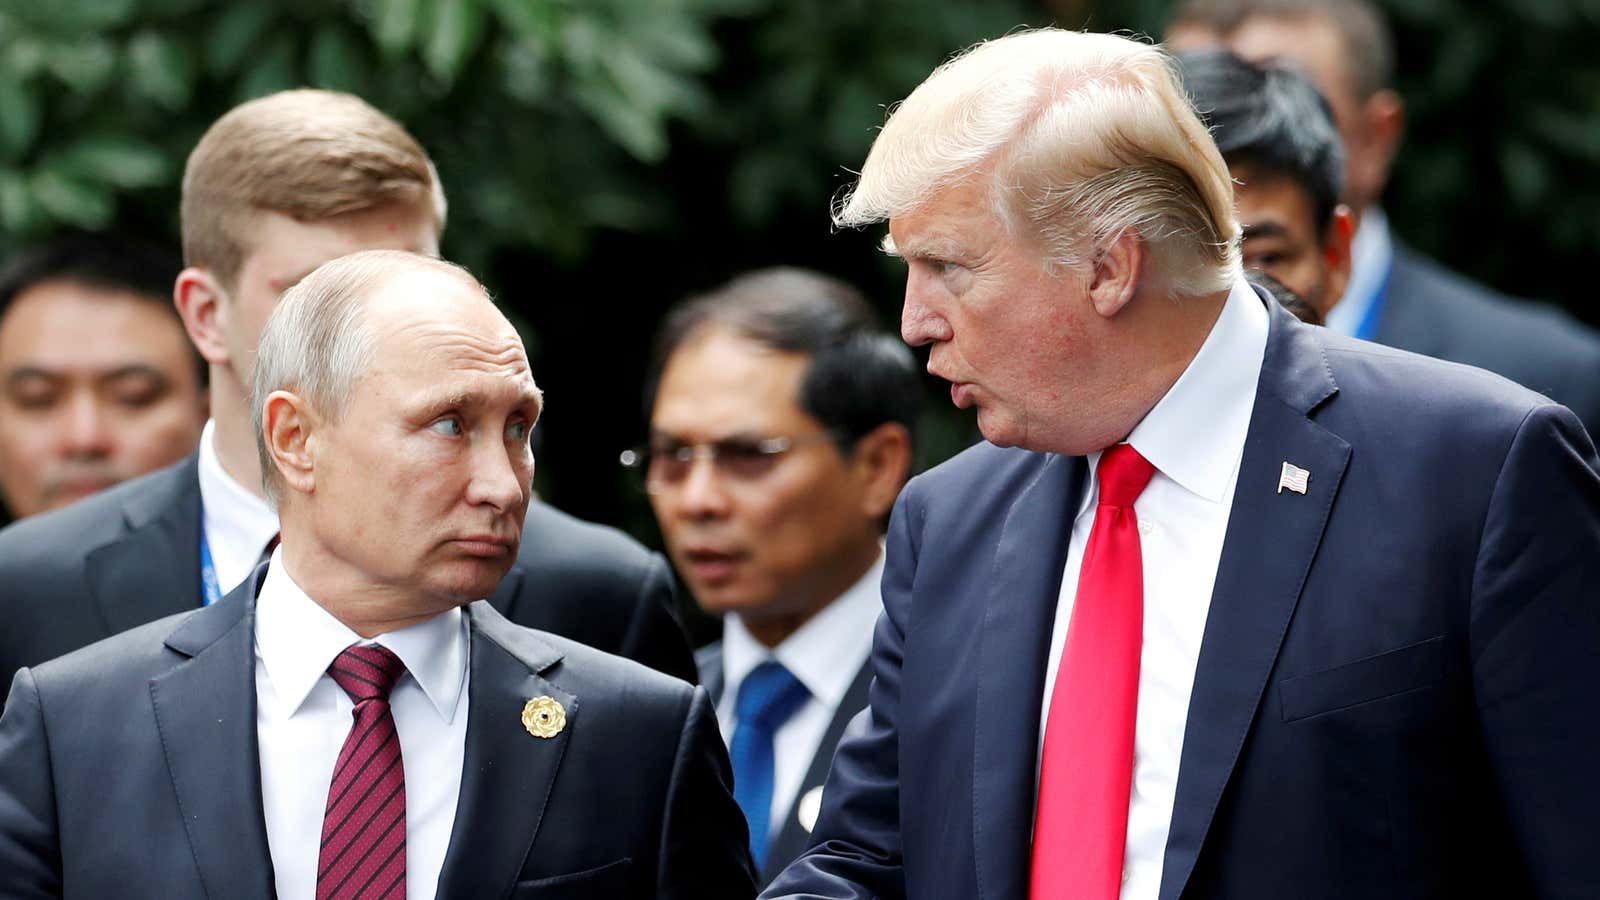 Trump and Putin: leaders of two of the world’s most unequal countries